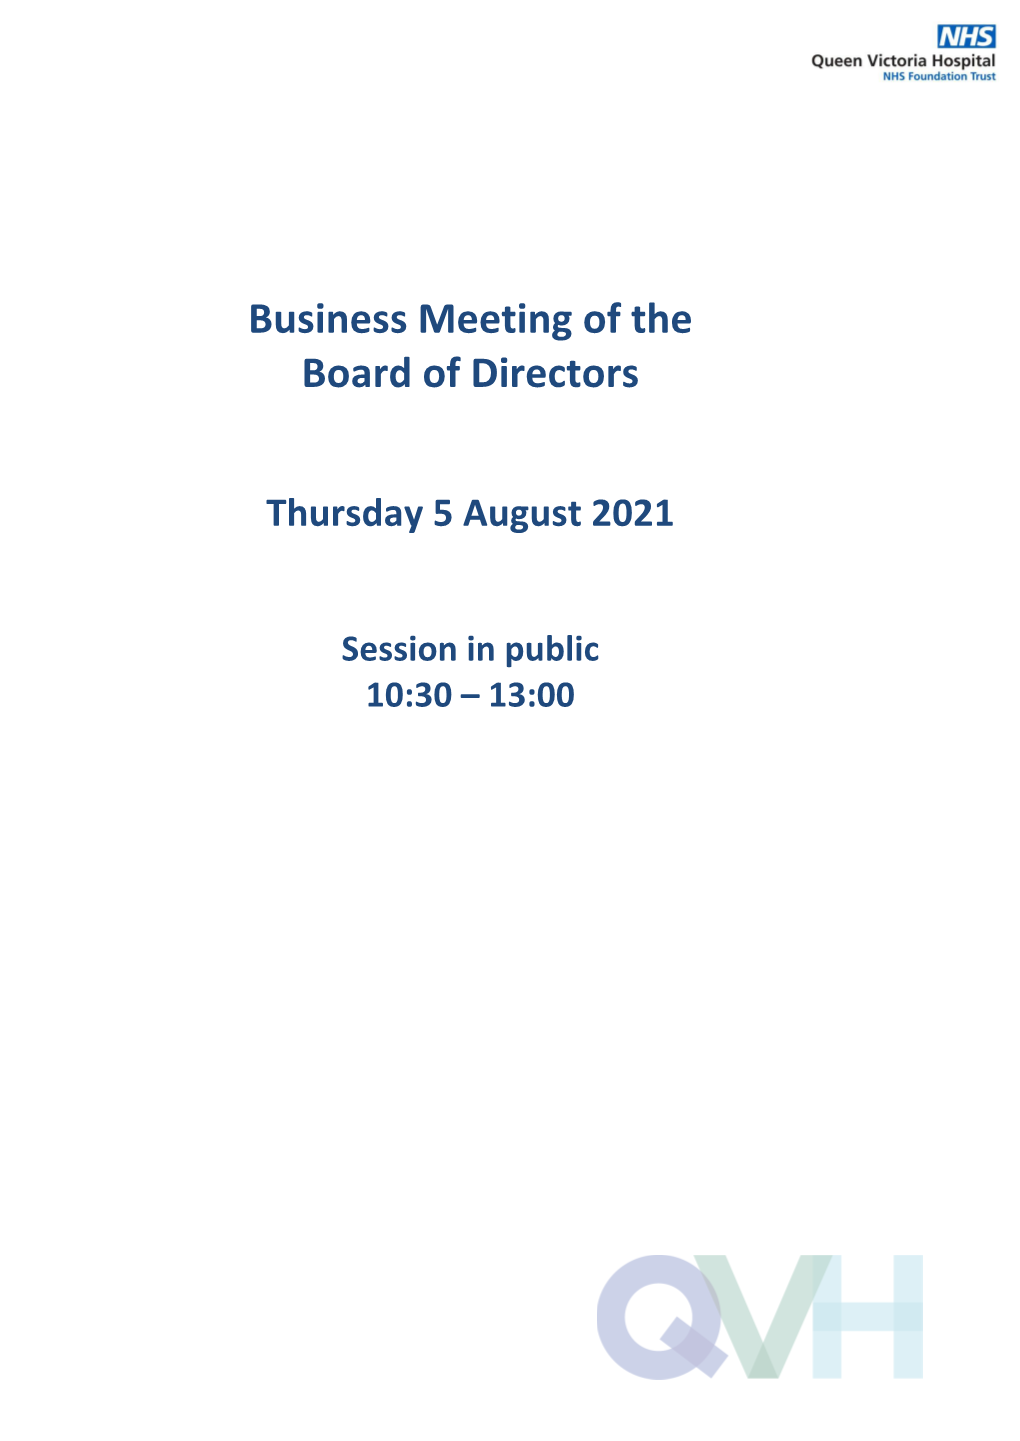 Business Meeting of the Board of Directors